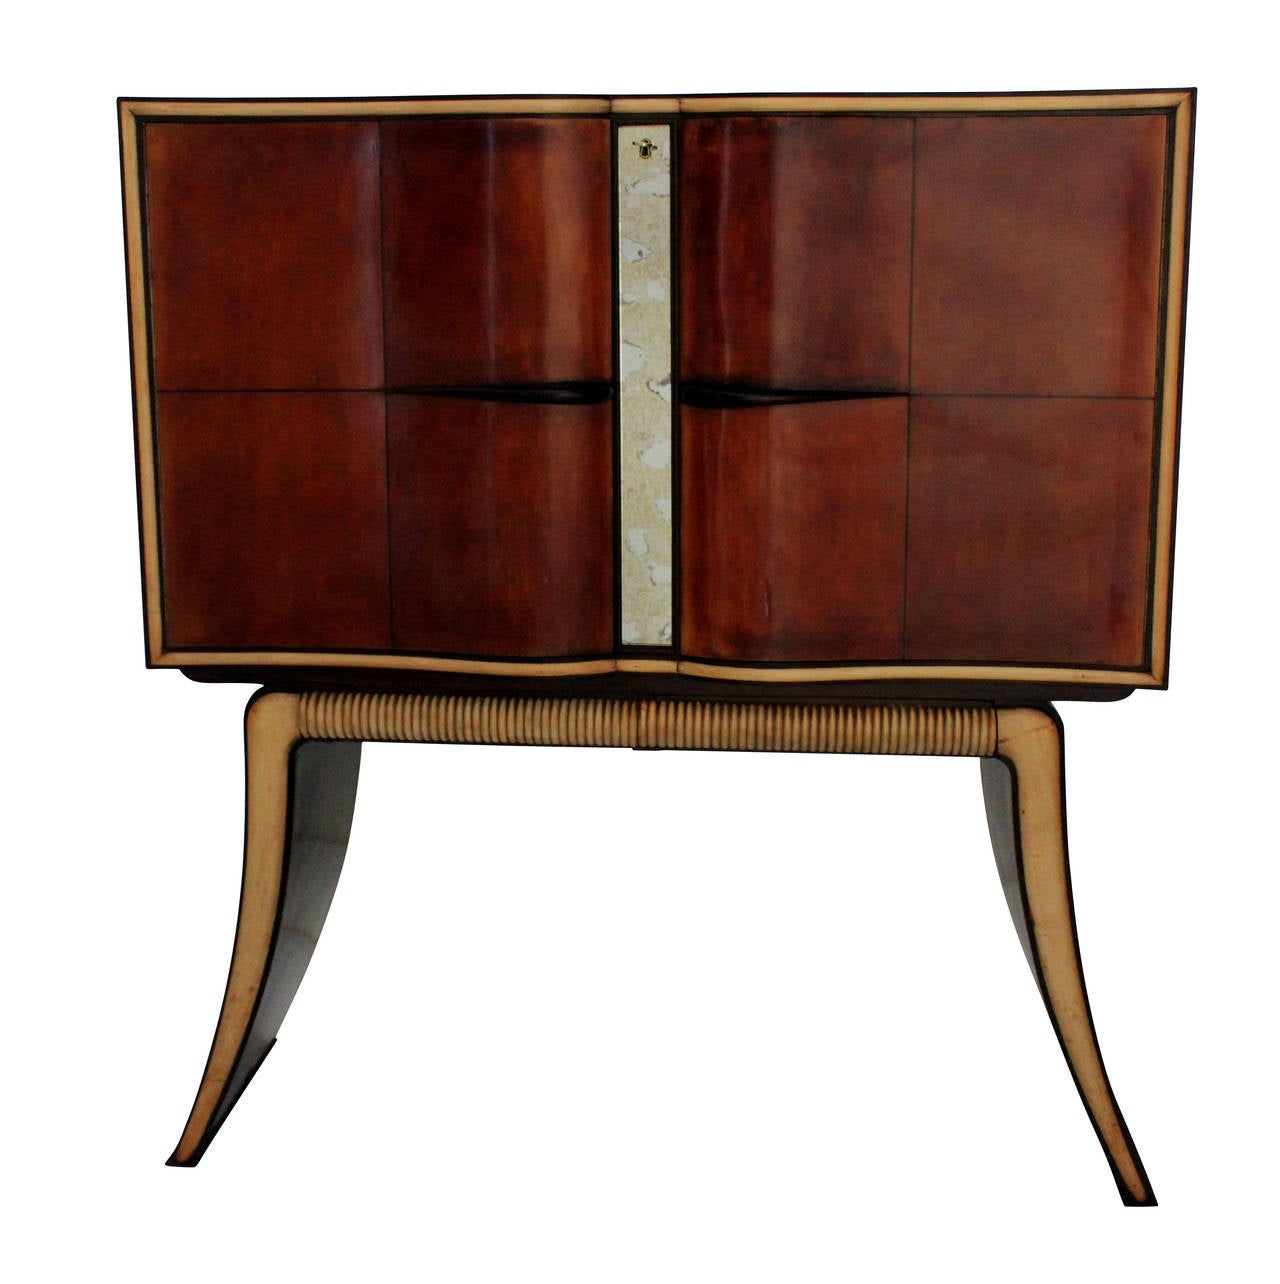 A stylish bar cabinet attributed to Borsani, on a splayed base with pale wood trim detail, two drawers, a distressed mirror detail to the door and sculptural handles. The bar interior has the original etched inner door panels, tiled mirror detailing